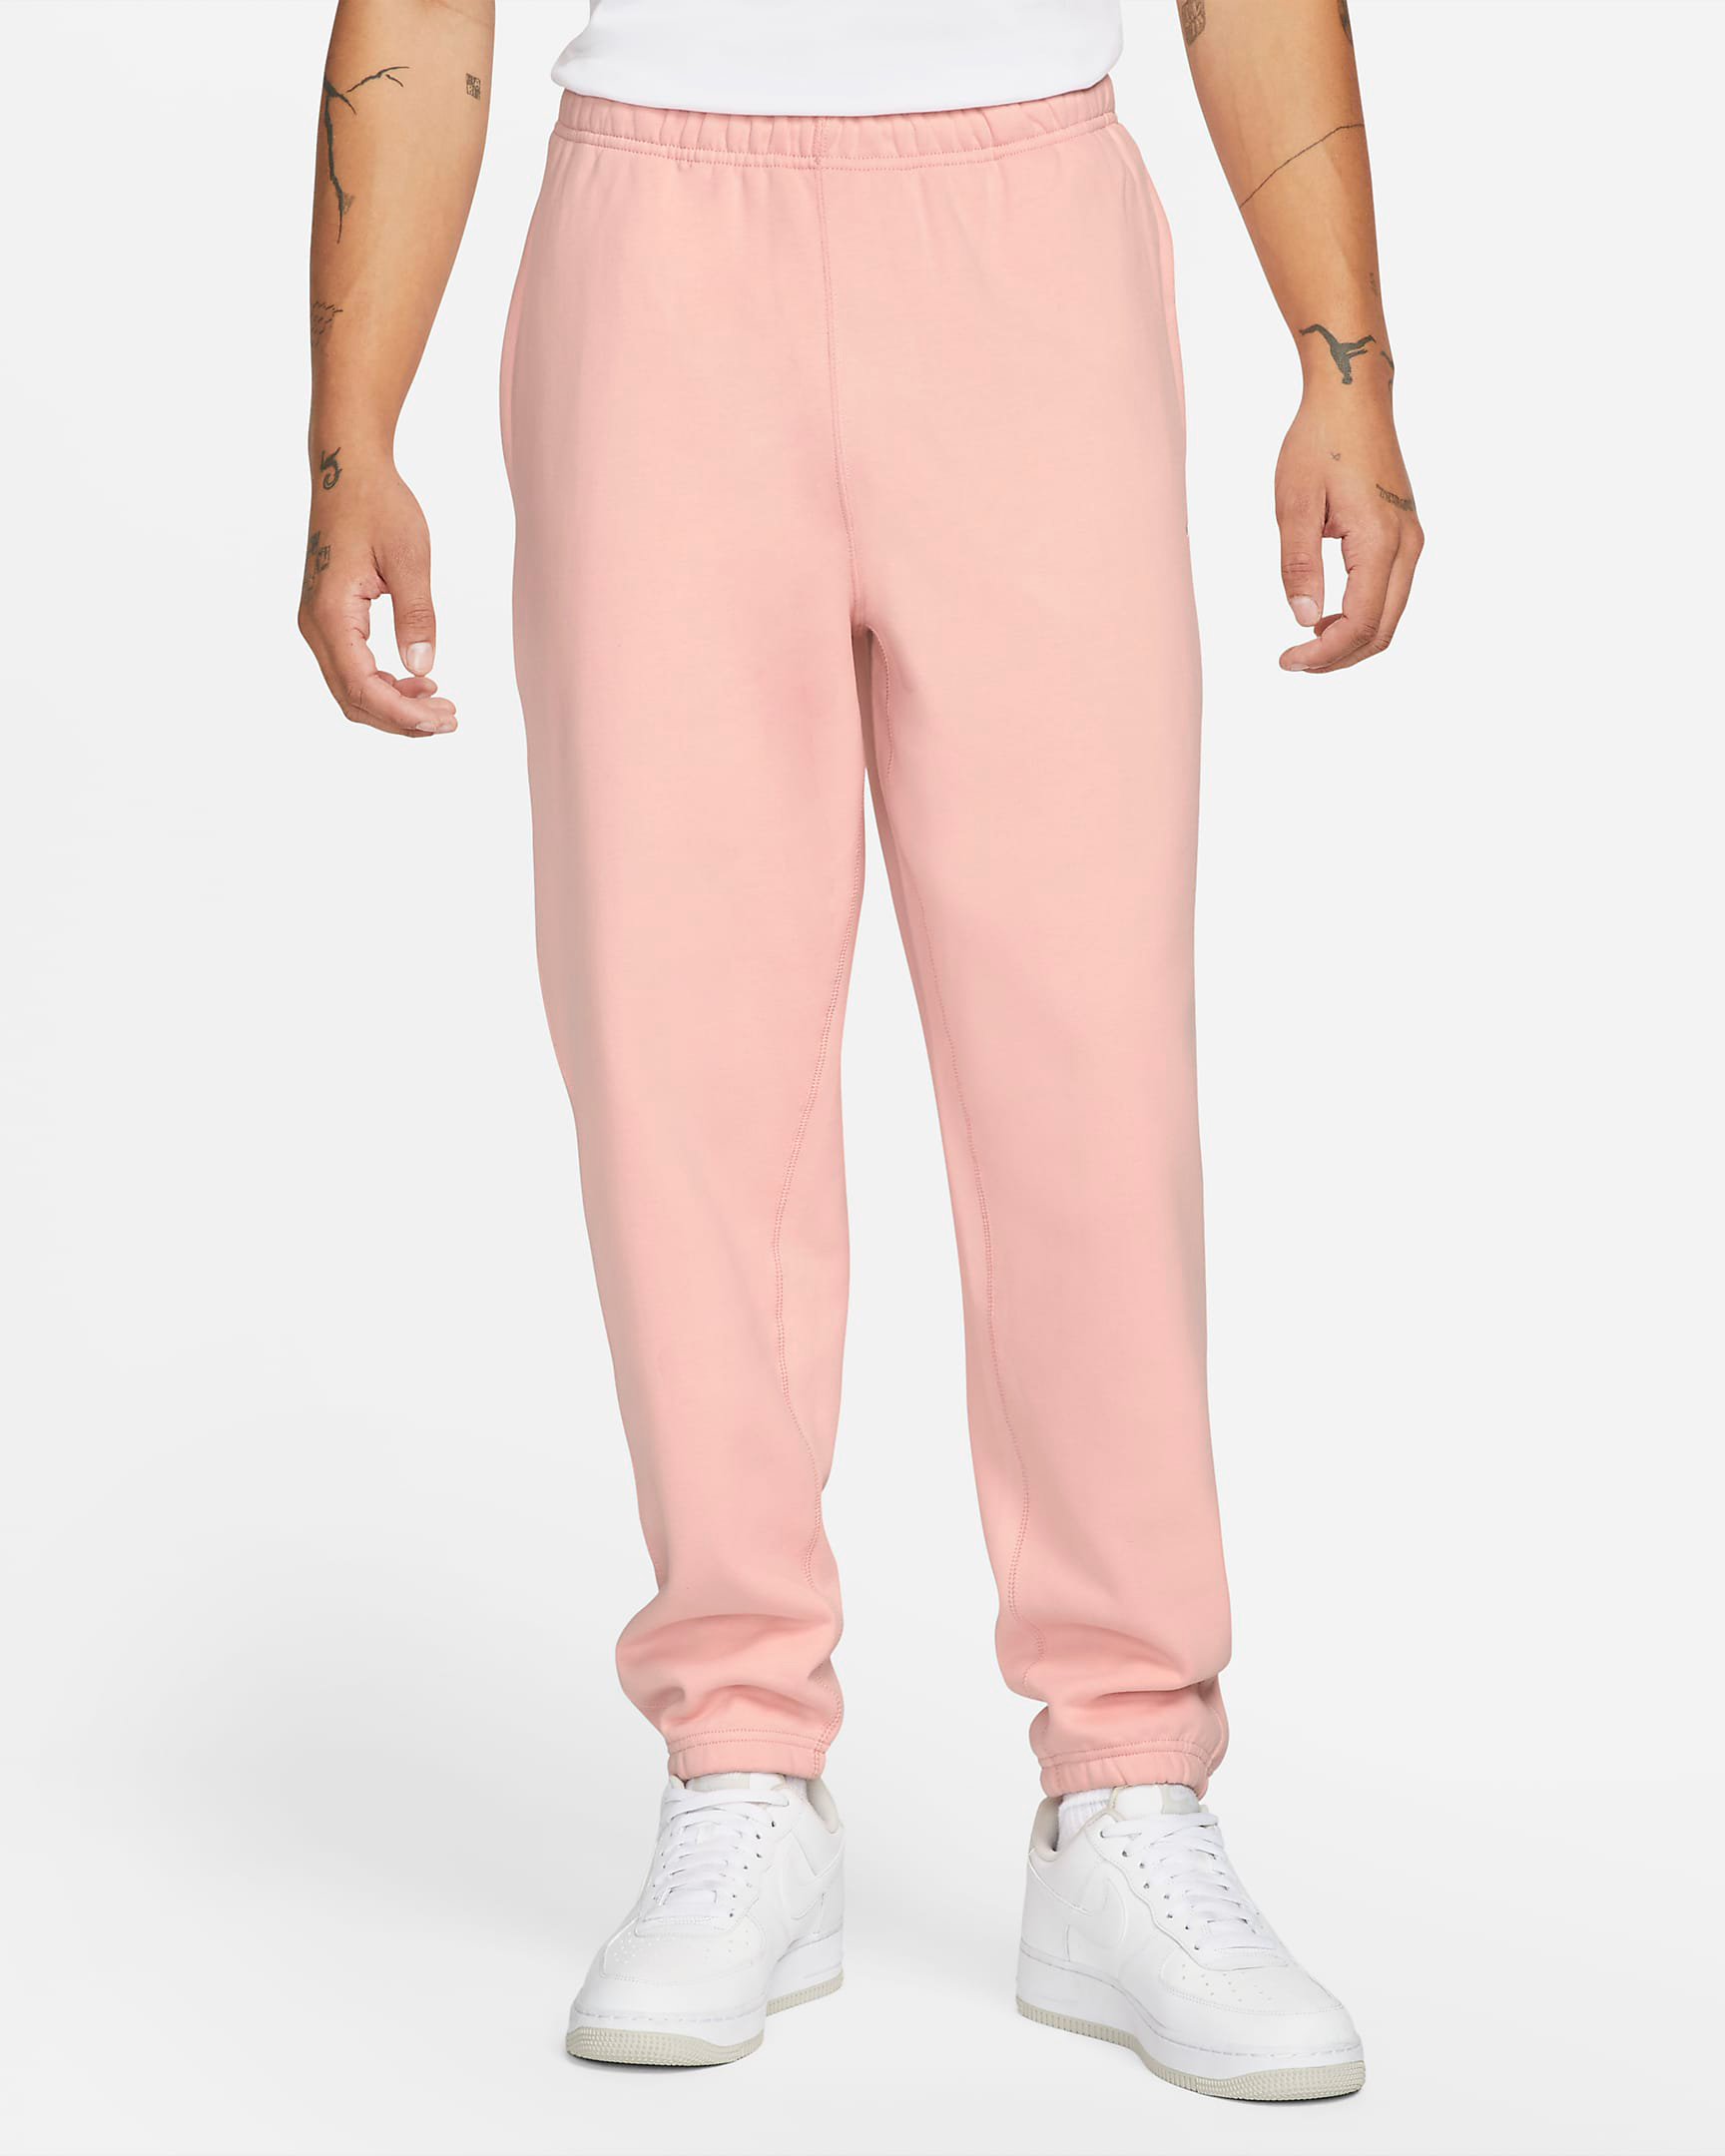 nike-bleached-coral-solo-swoosh-pants-1